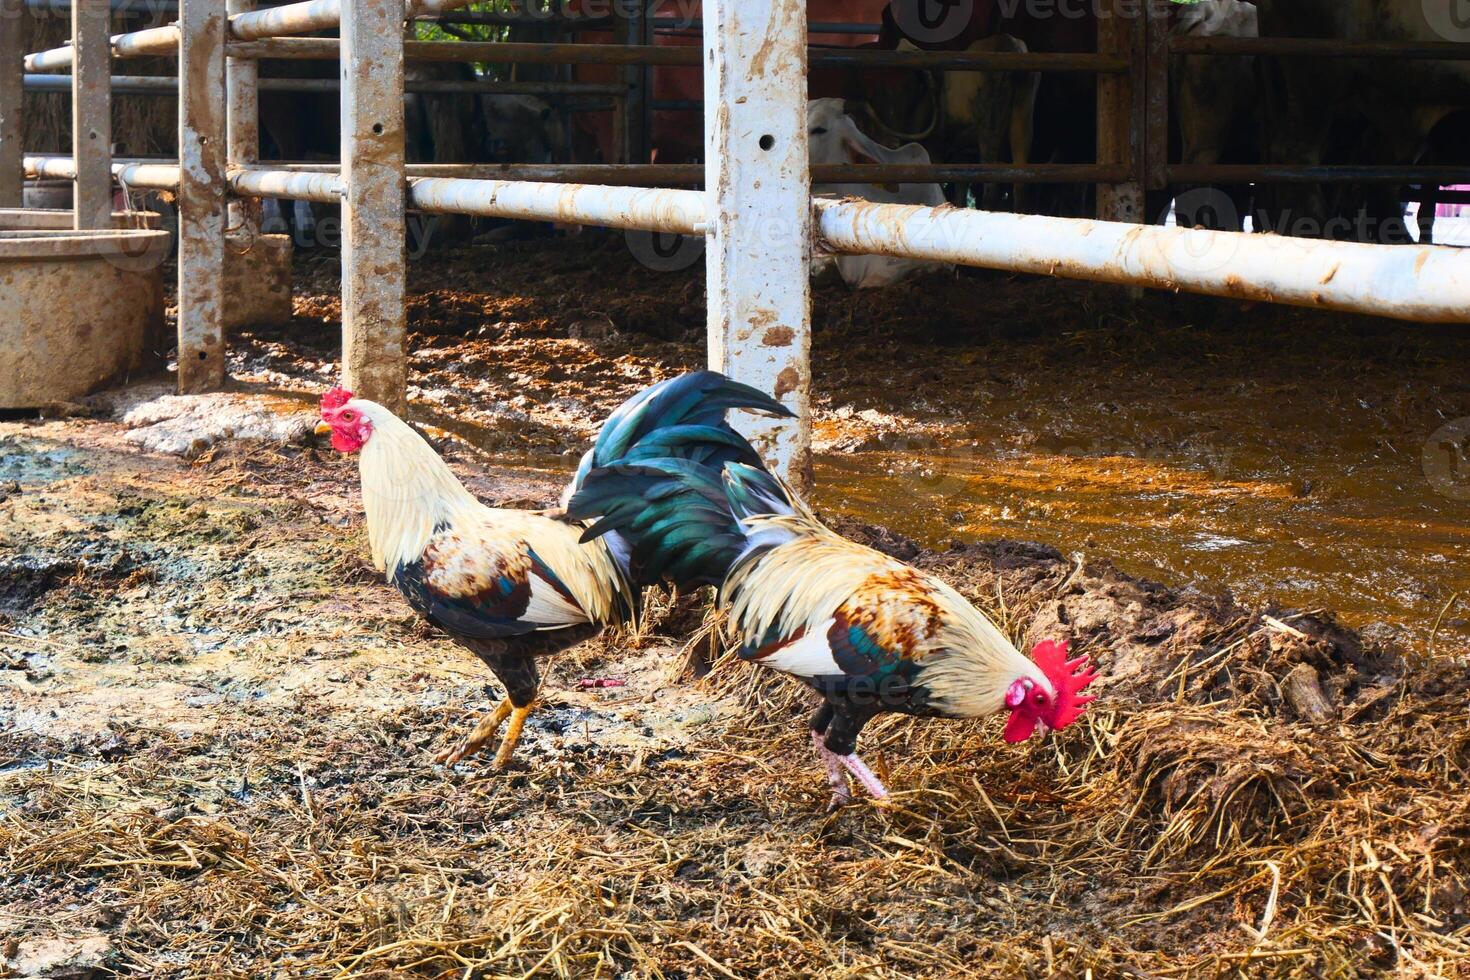 Chicken with red beak and crest And it has a beautiful long green tail Standing near an animal pen that was wet with dirt photo